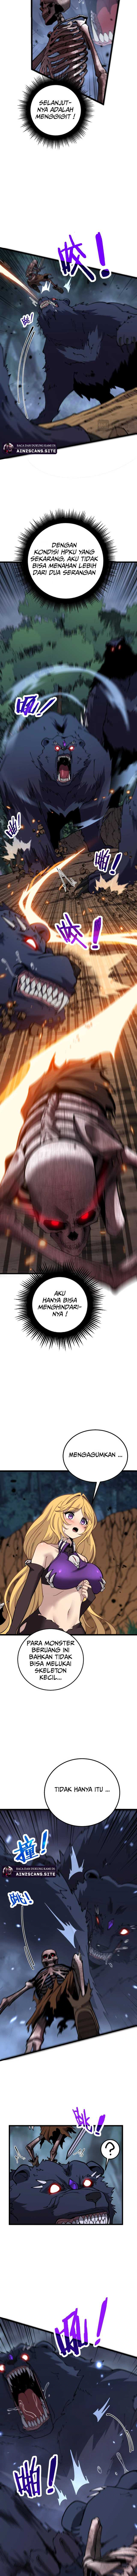 Skeleton Evolution: Starting from Being Summoned by a Goddess Chapter 03